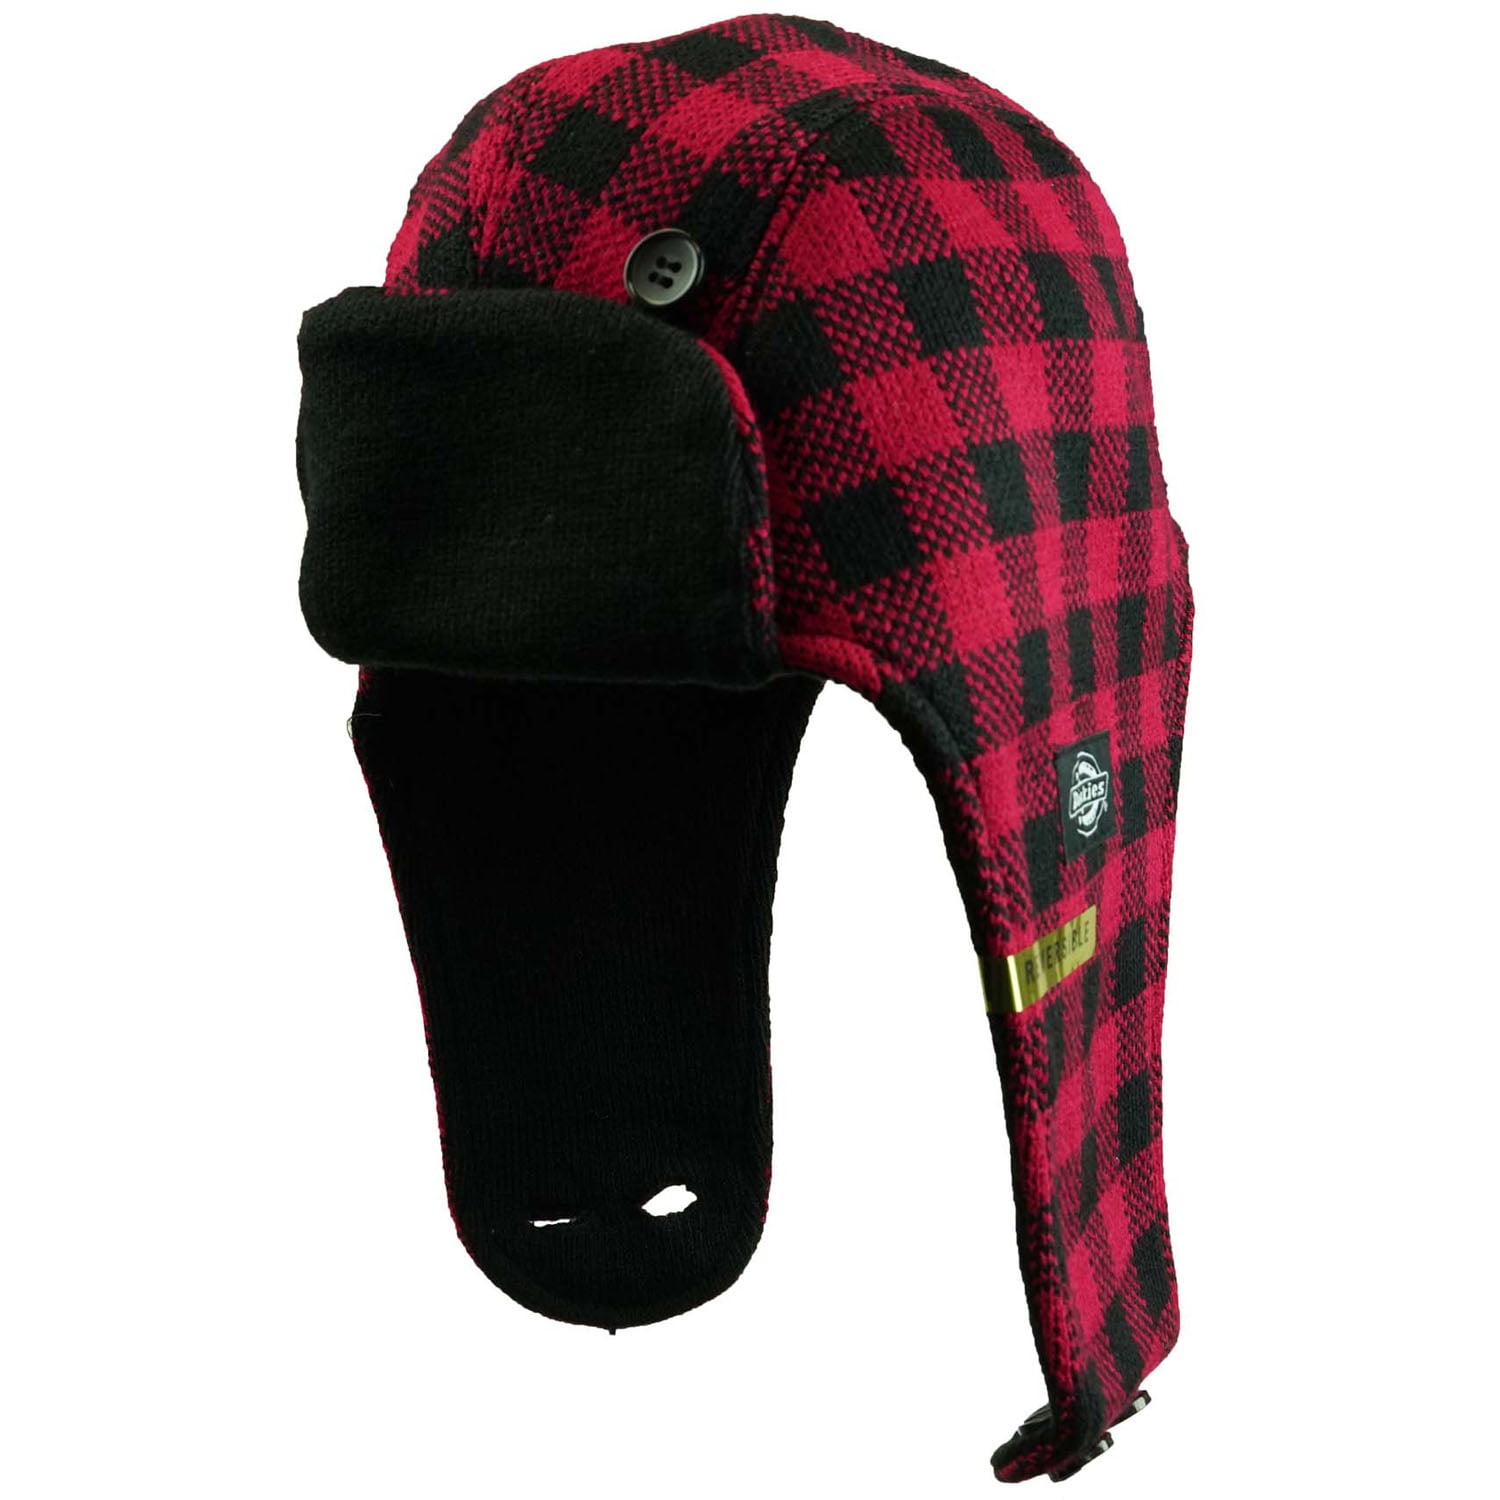 Dickies (Brand) Men's Knit Checkered Reversible Trapper Hat Beanie ...